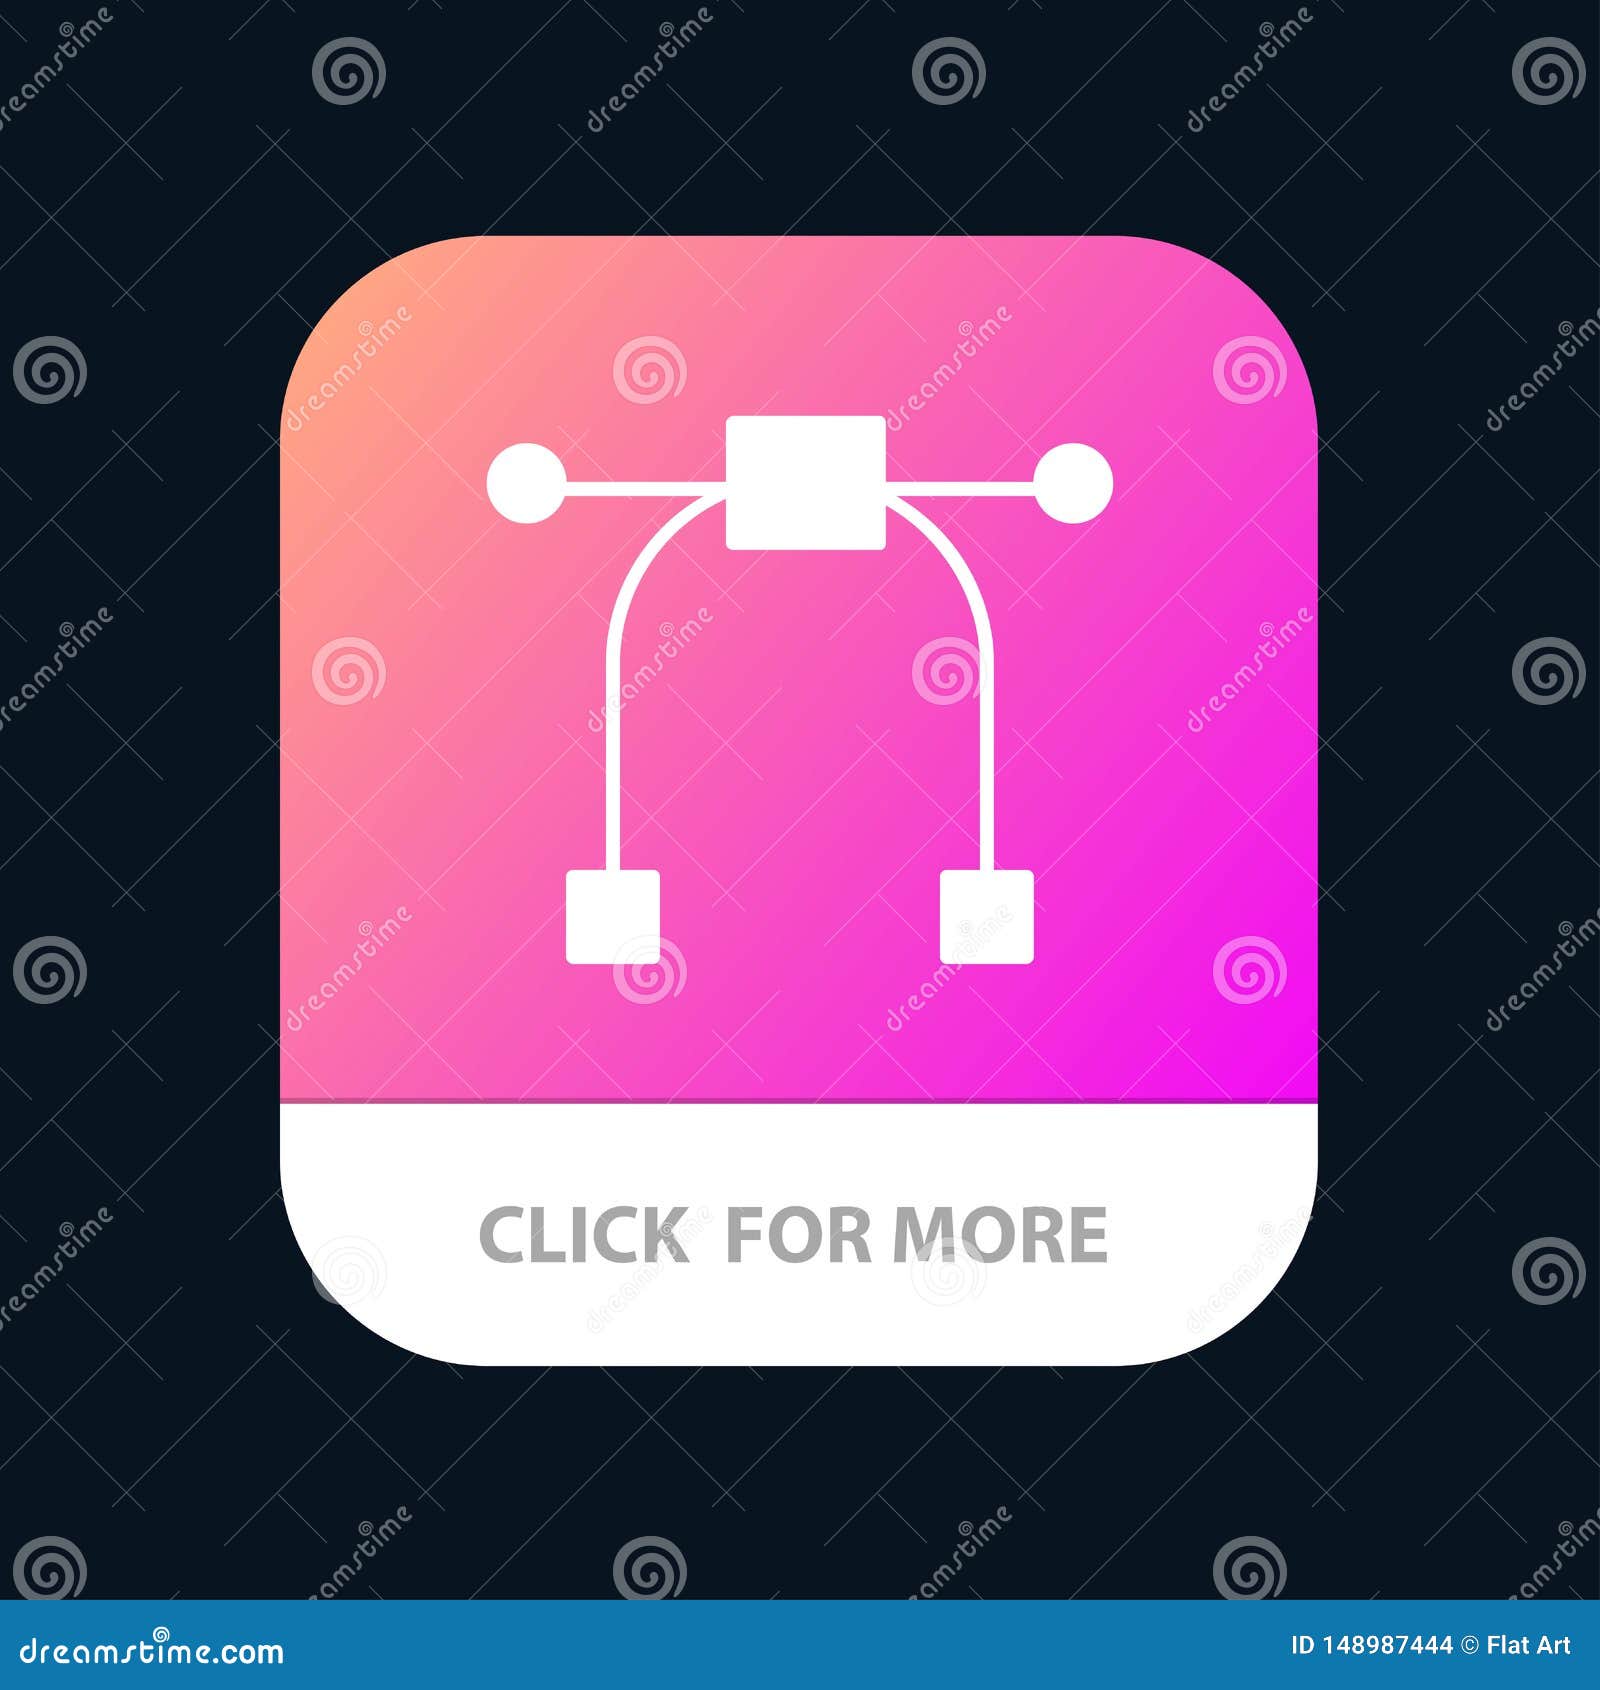 Design Graphic Tool Mobile App Button Android And Ios Glyph